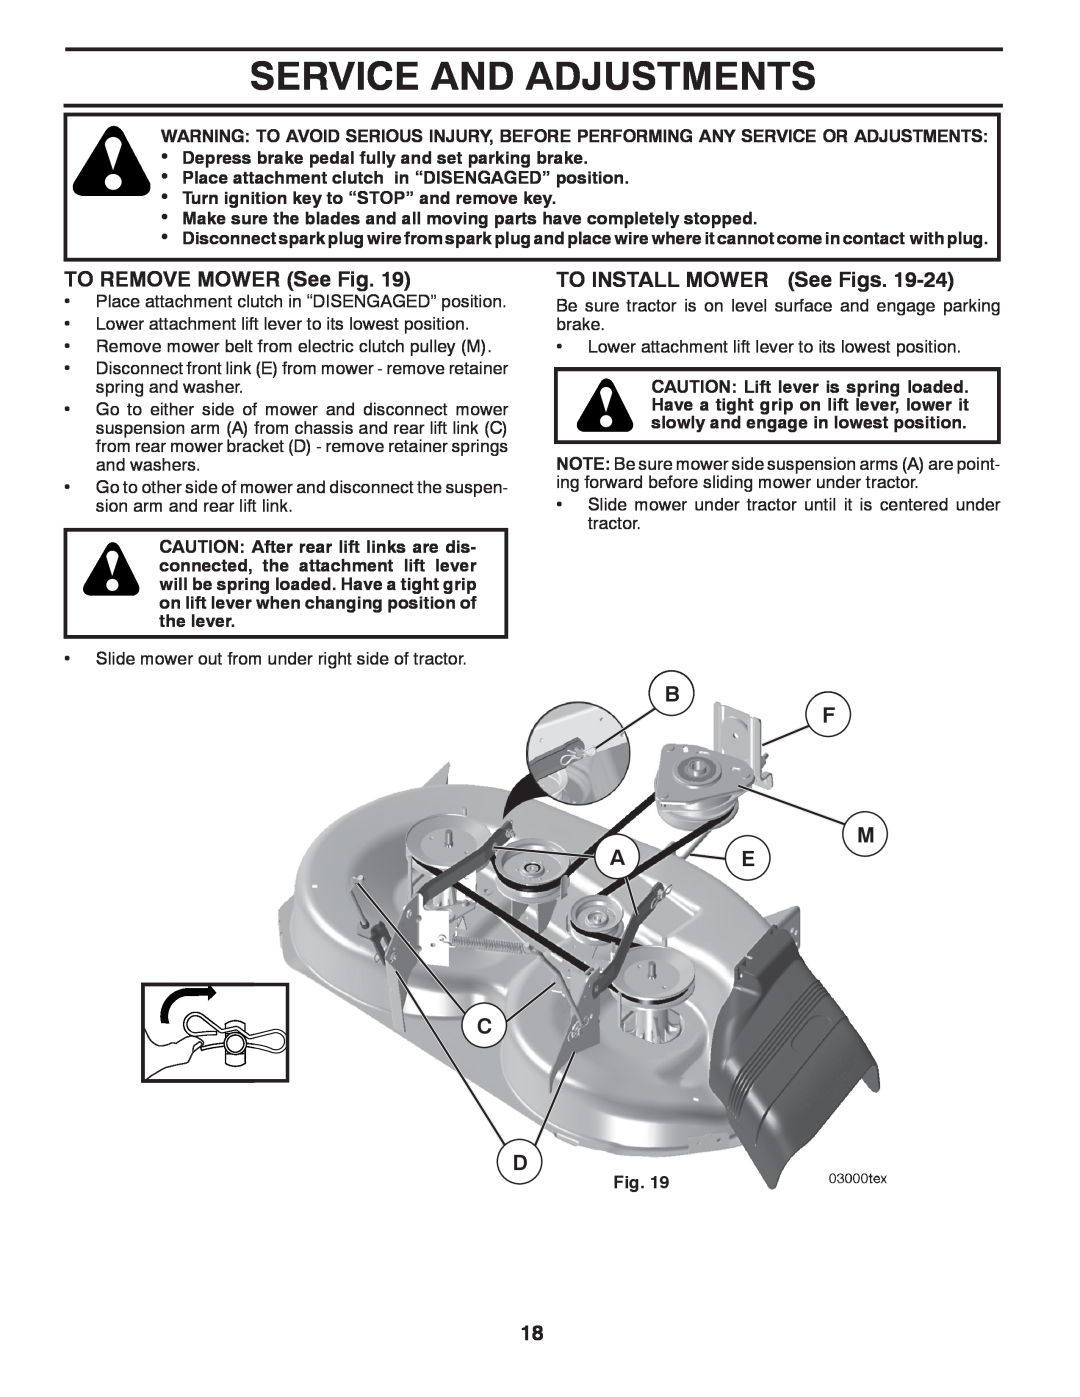 Poulan XT195H46YT manual Service And Adjustments, TO REMOVE MOWER See Fig, TO INSTALL MOWER See Figs, M A E C D 